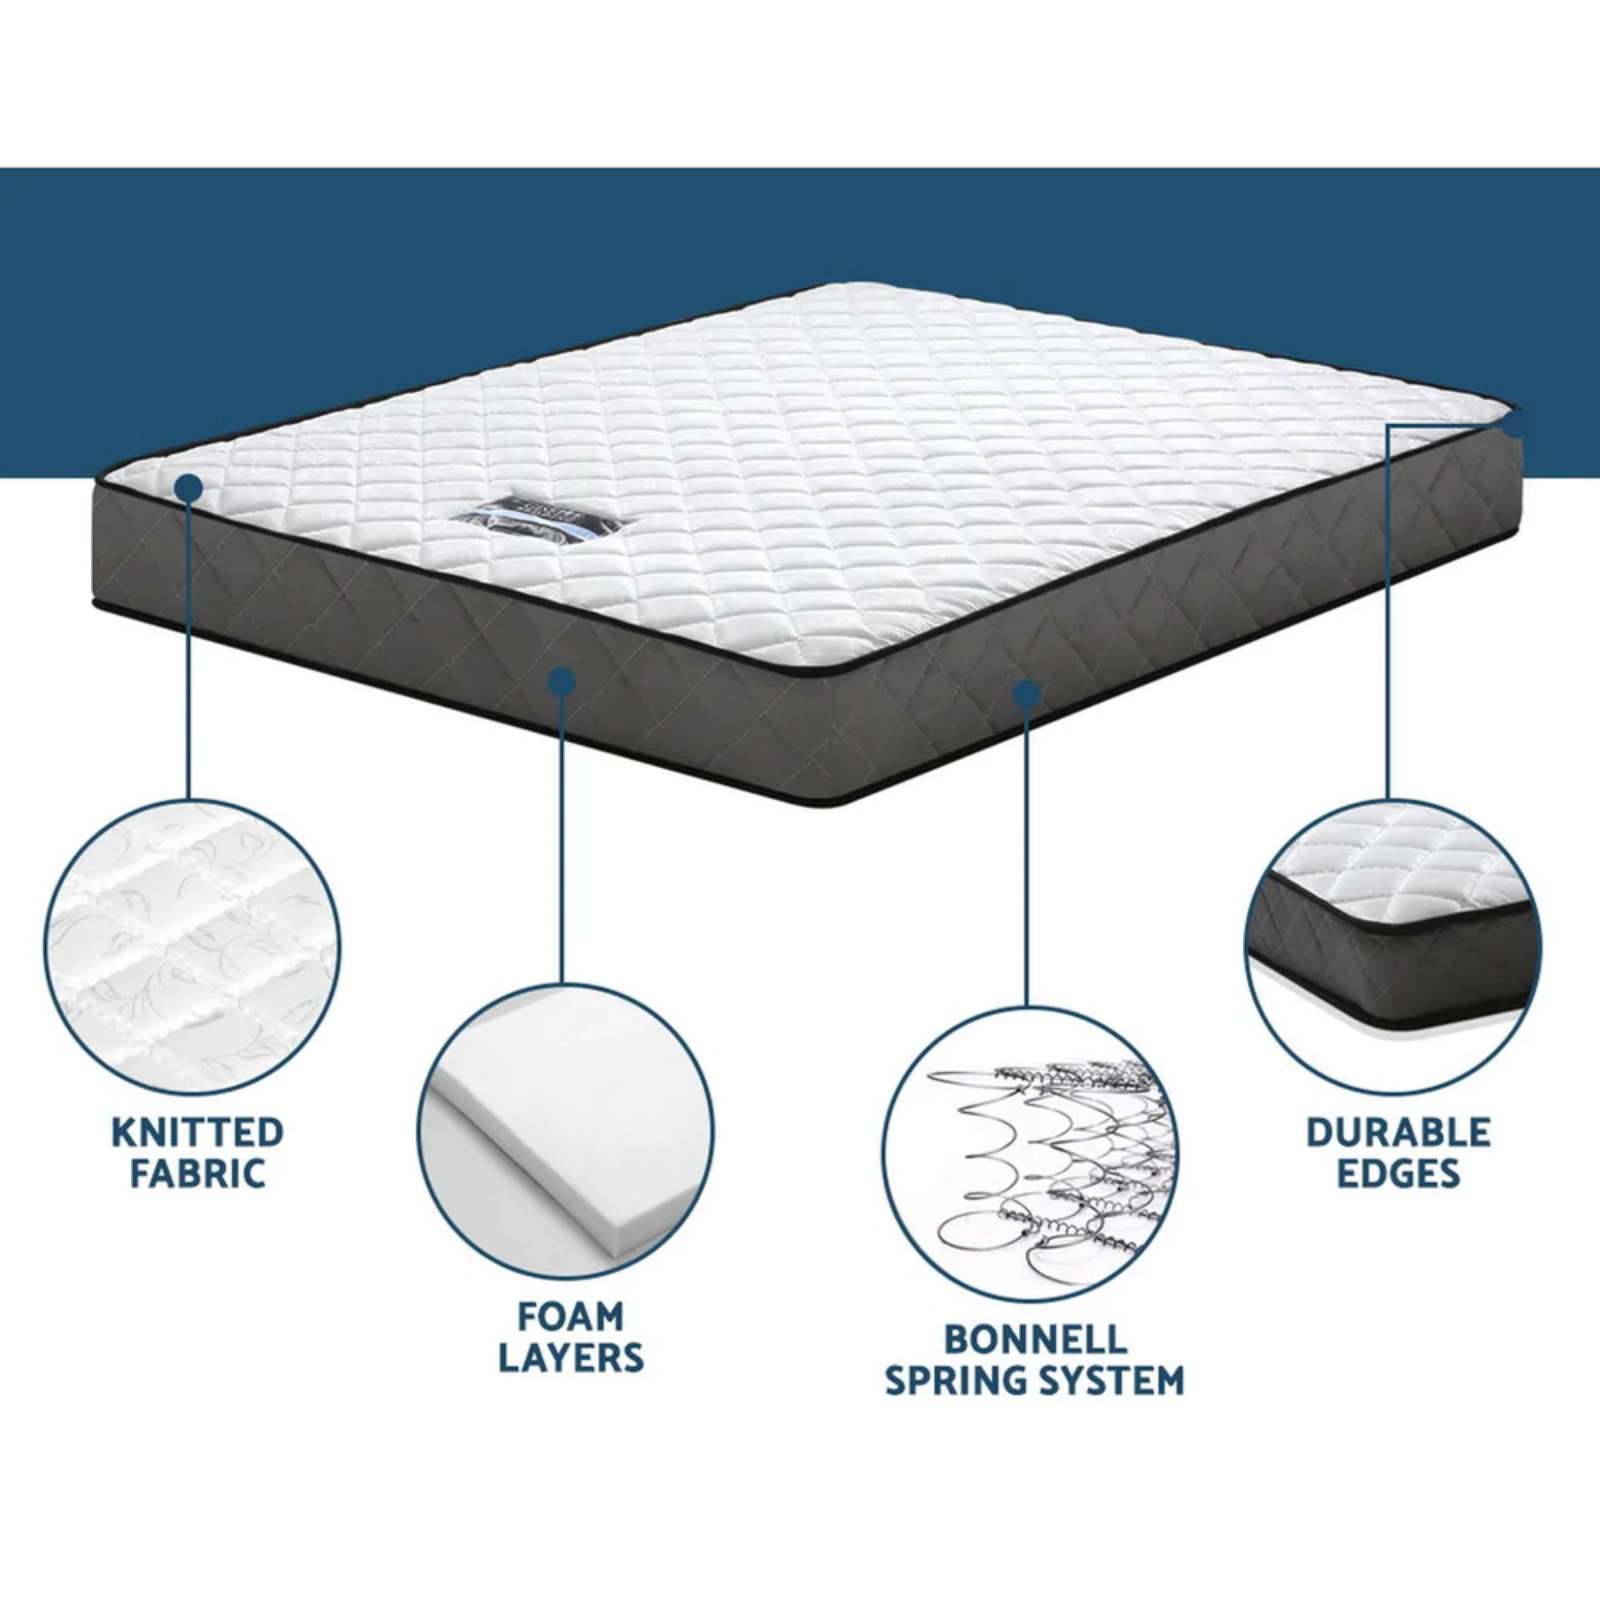 Giselle Bedding Alzbeta Spring Mattress has knitted fabric, foam layers, Bonnell spring system and durable edges